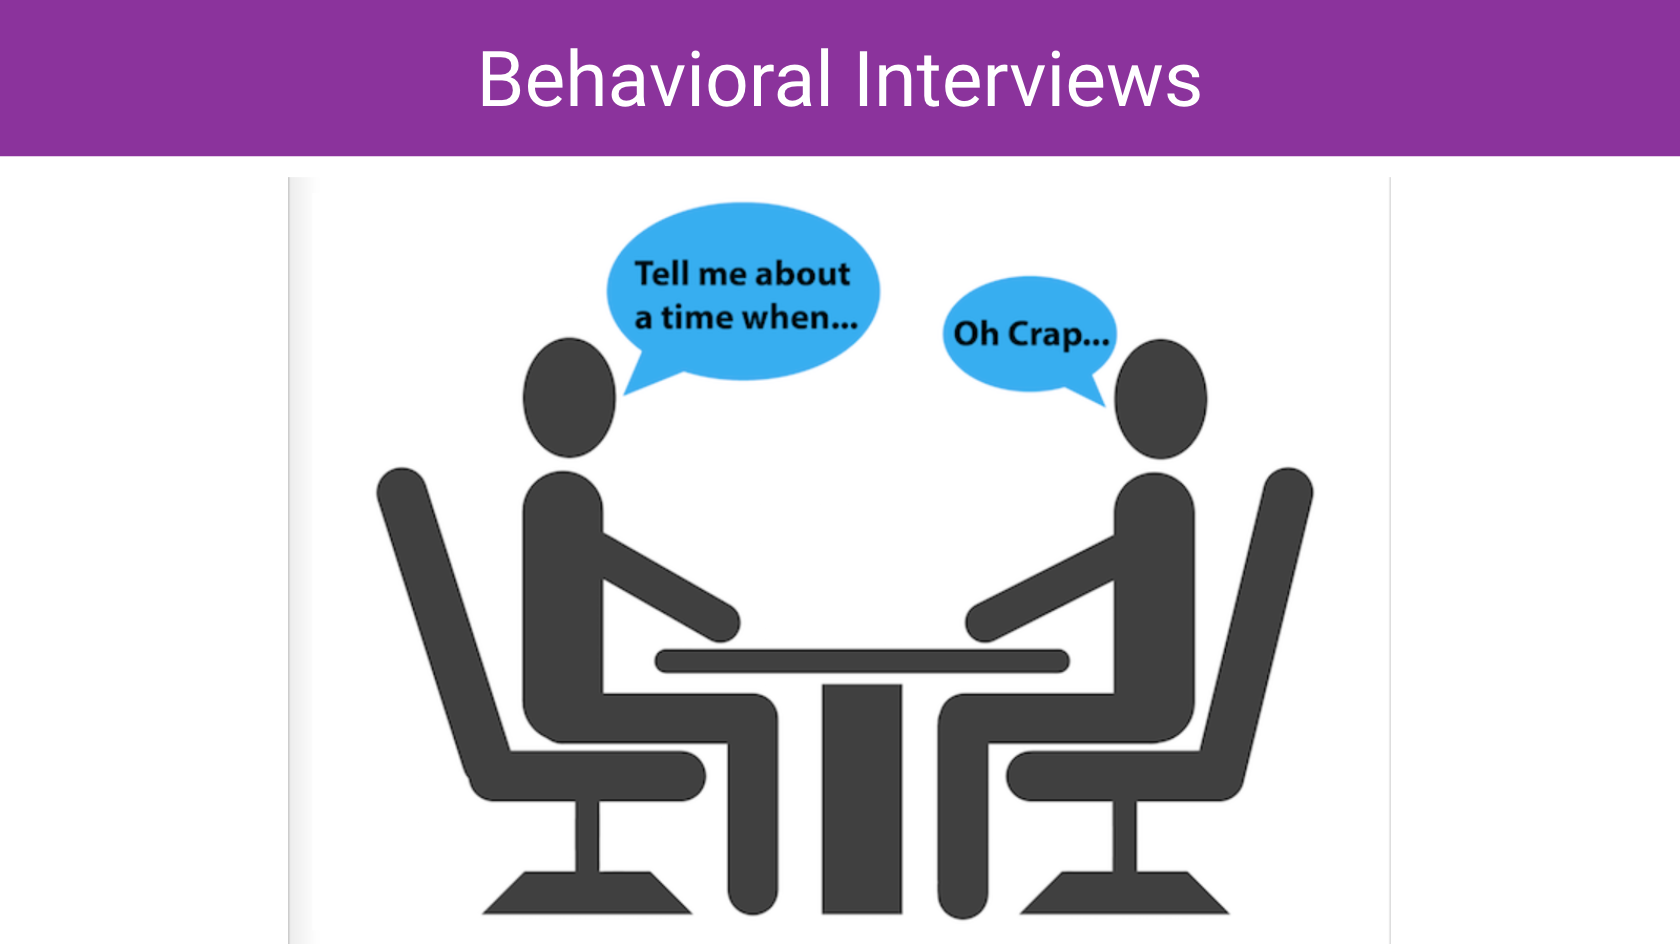 Ace Your Tech Interview As A Software Engineer [Part 22] - Behavioral Interviews